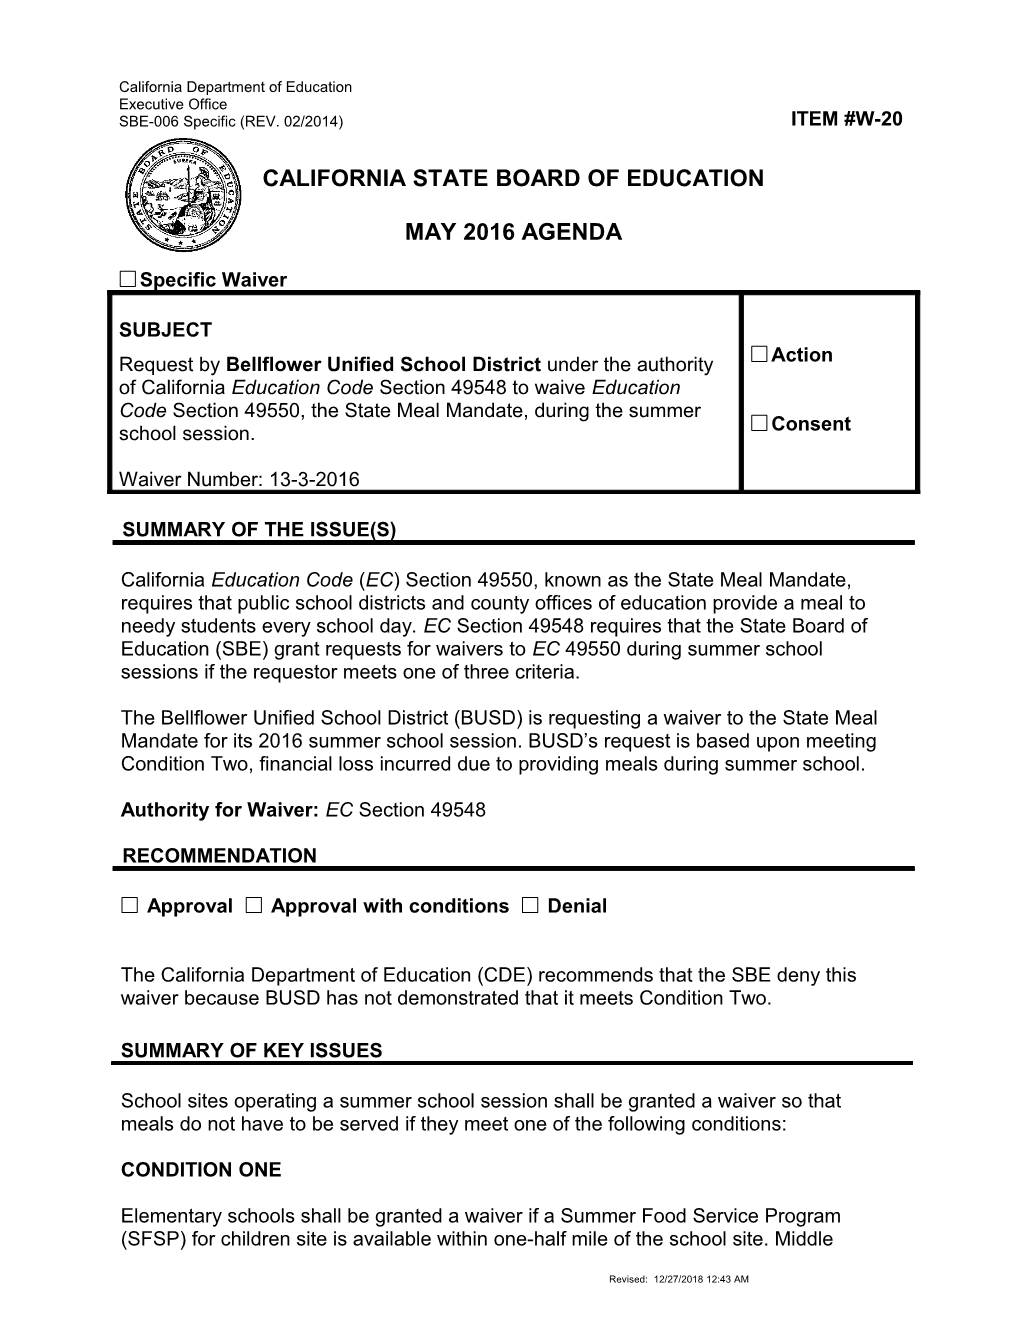 May 2016 Waiver Item W-20 - Meeting Agendas (CA State Board of Education)